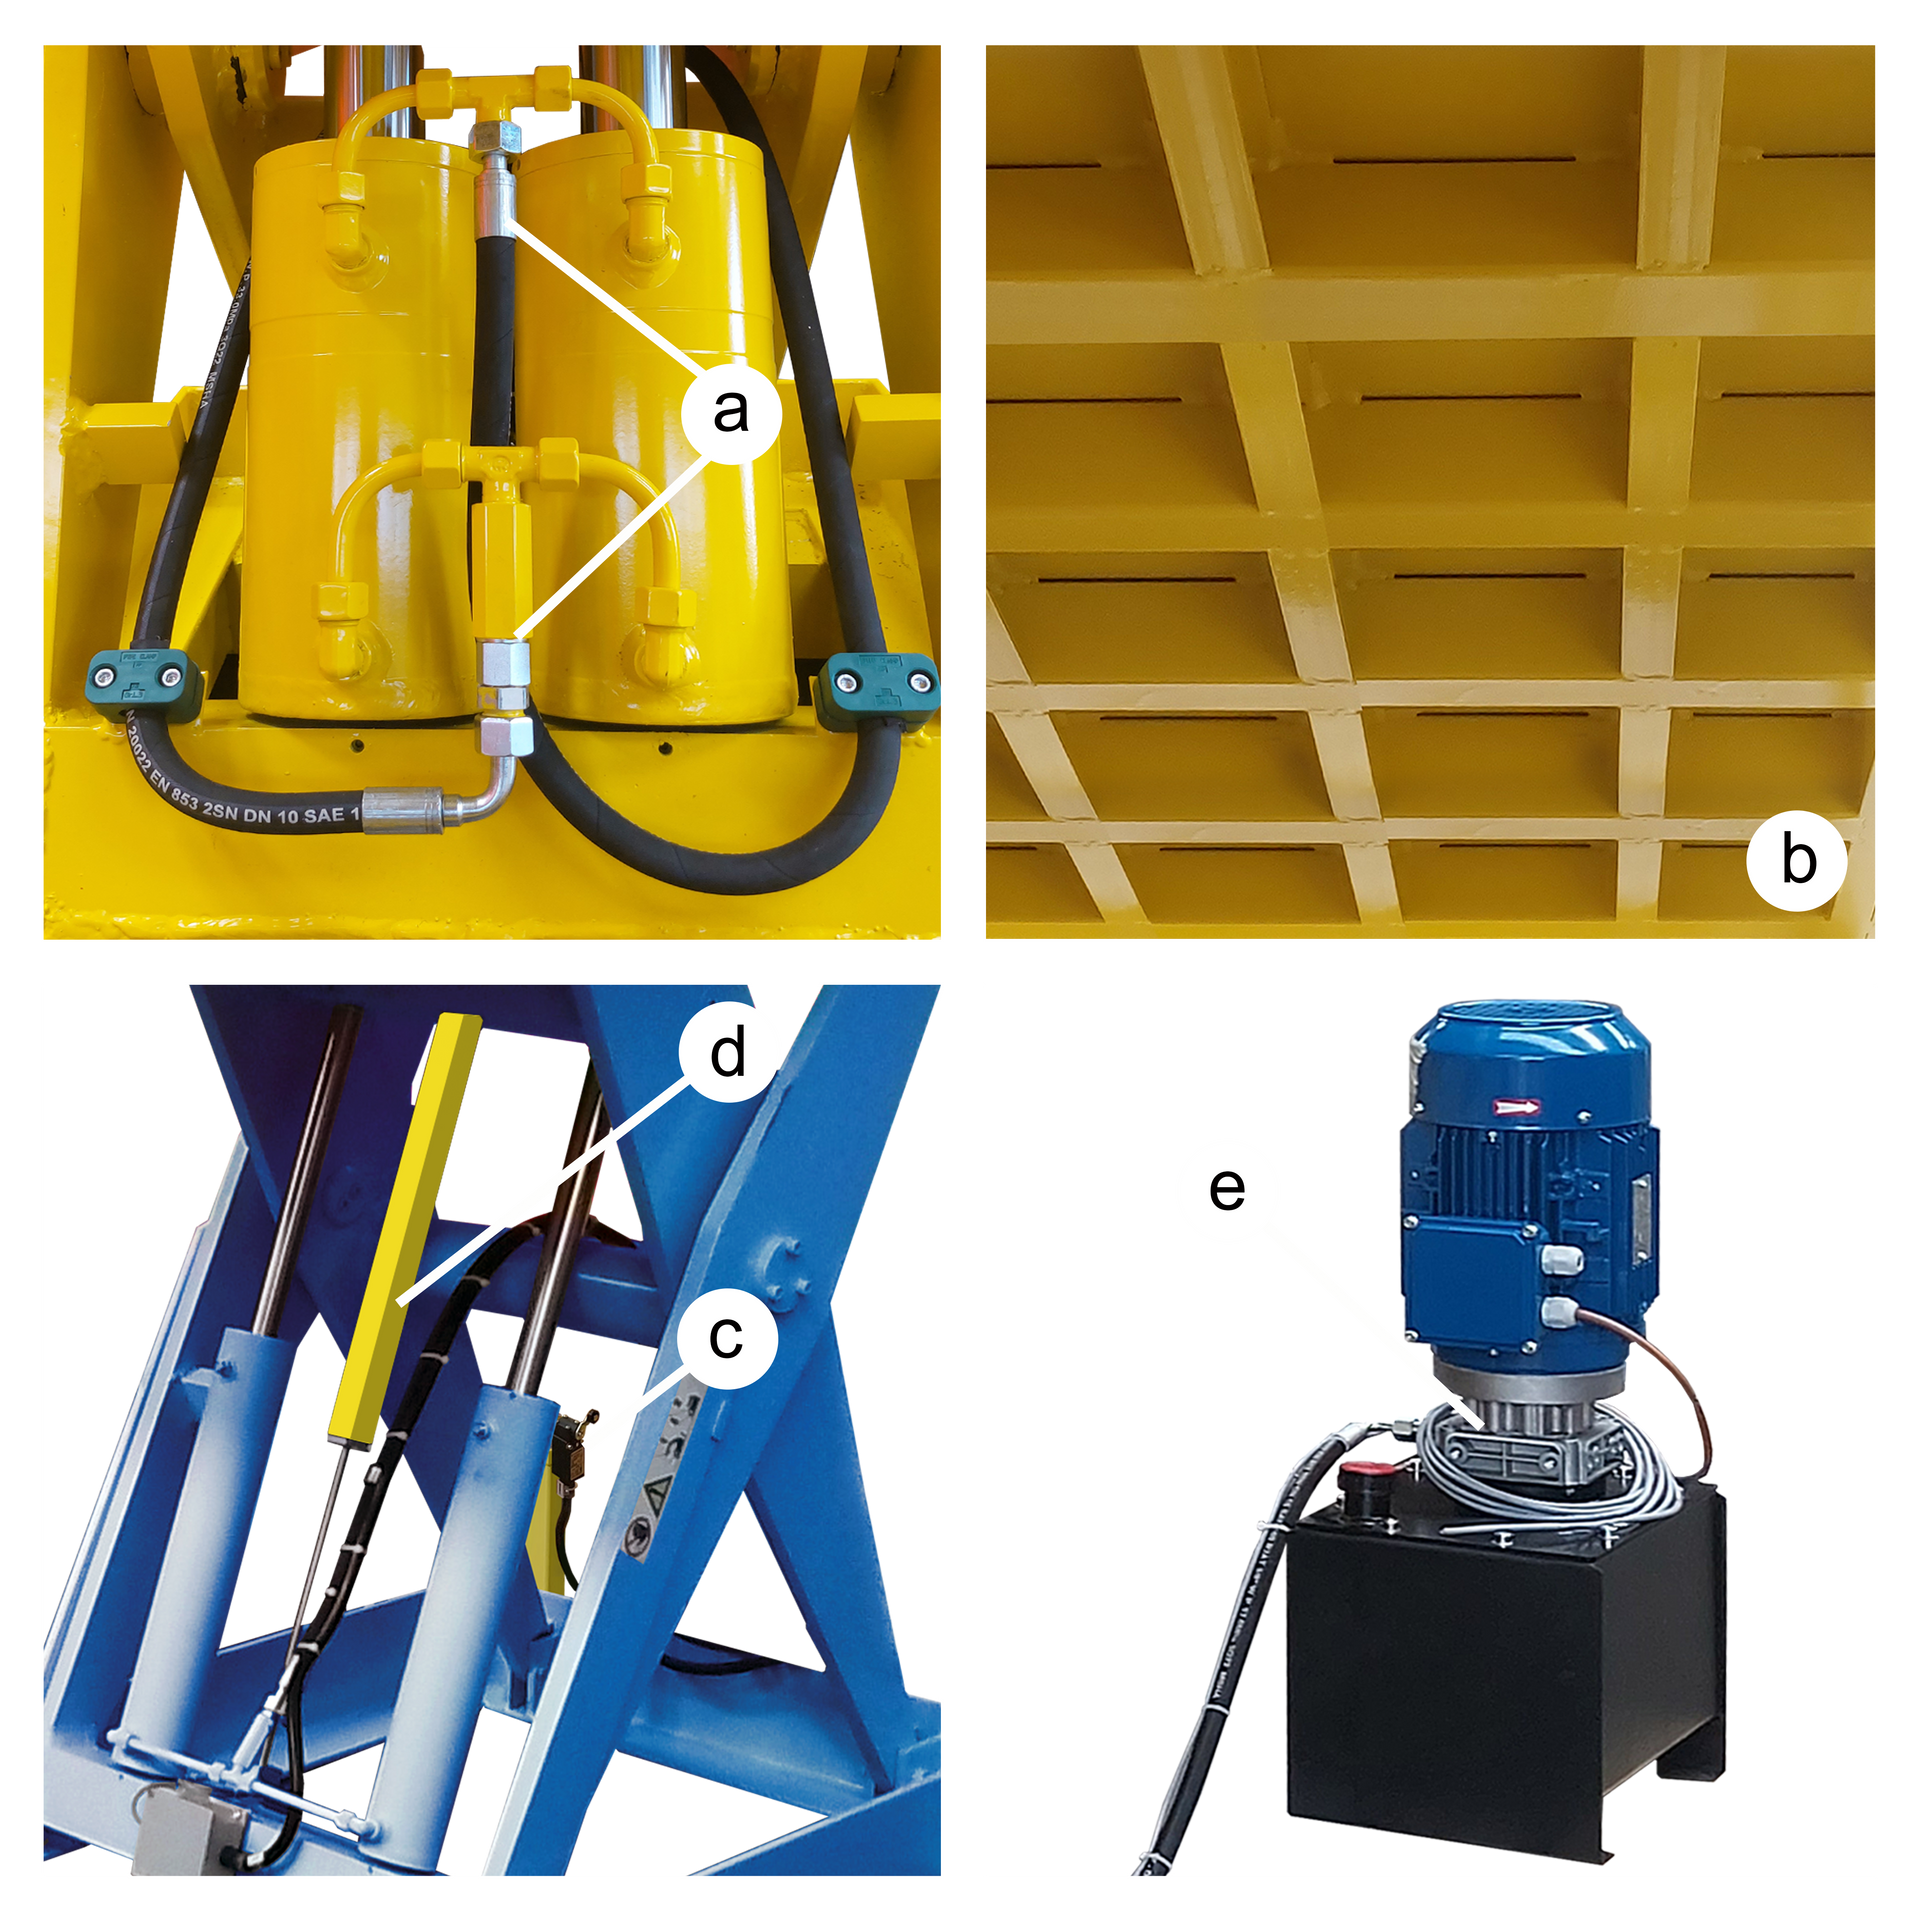 Lift table configuration options